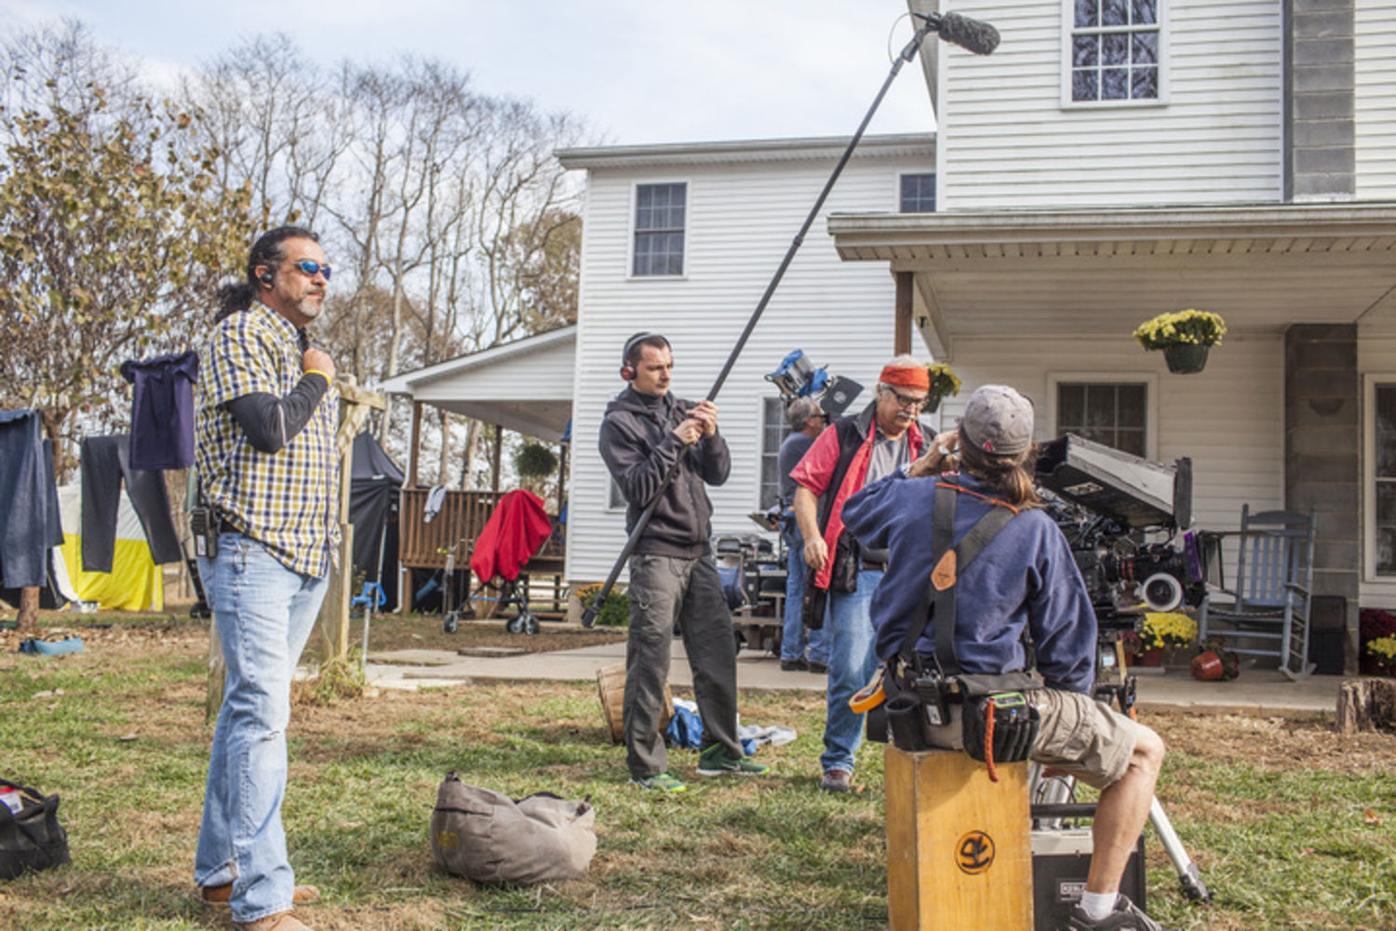 Hollywood, KY Movie being filmed in Hart County could be first of many